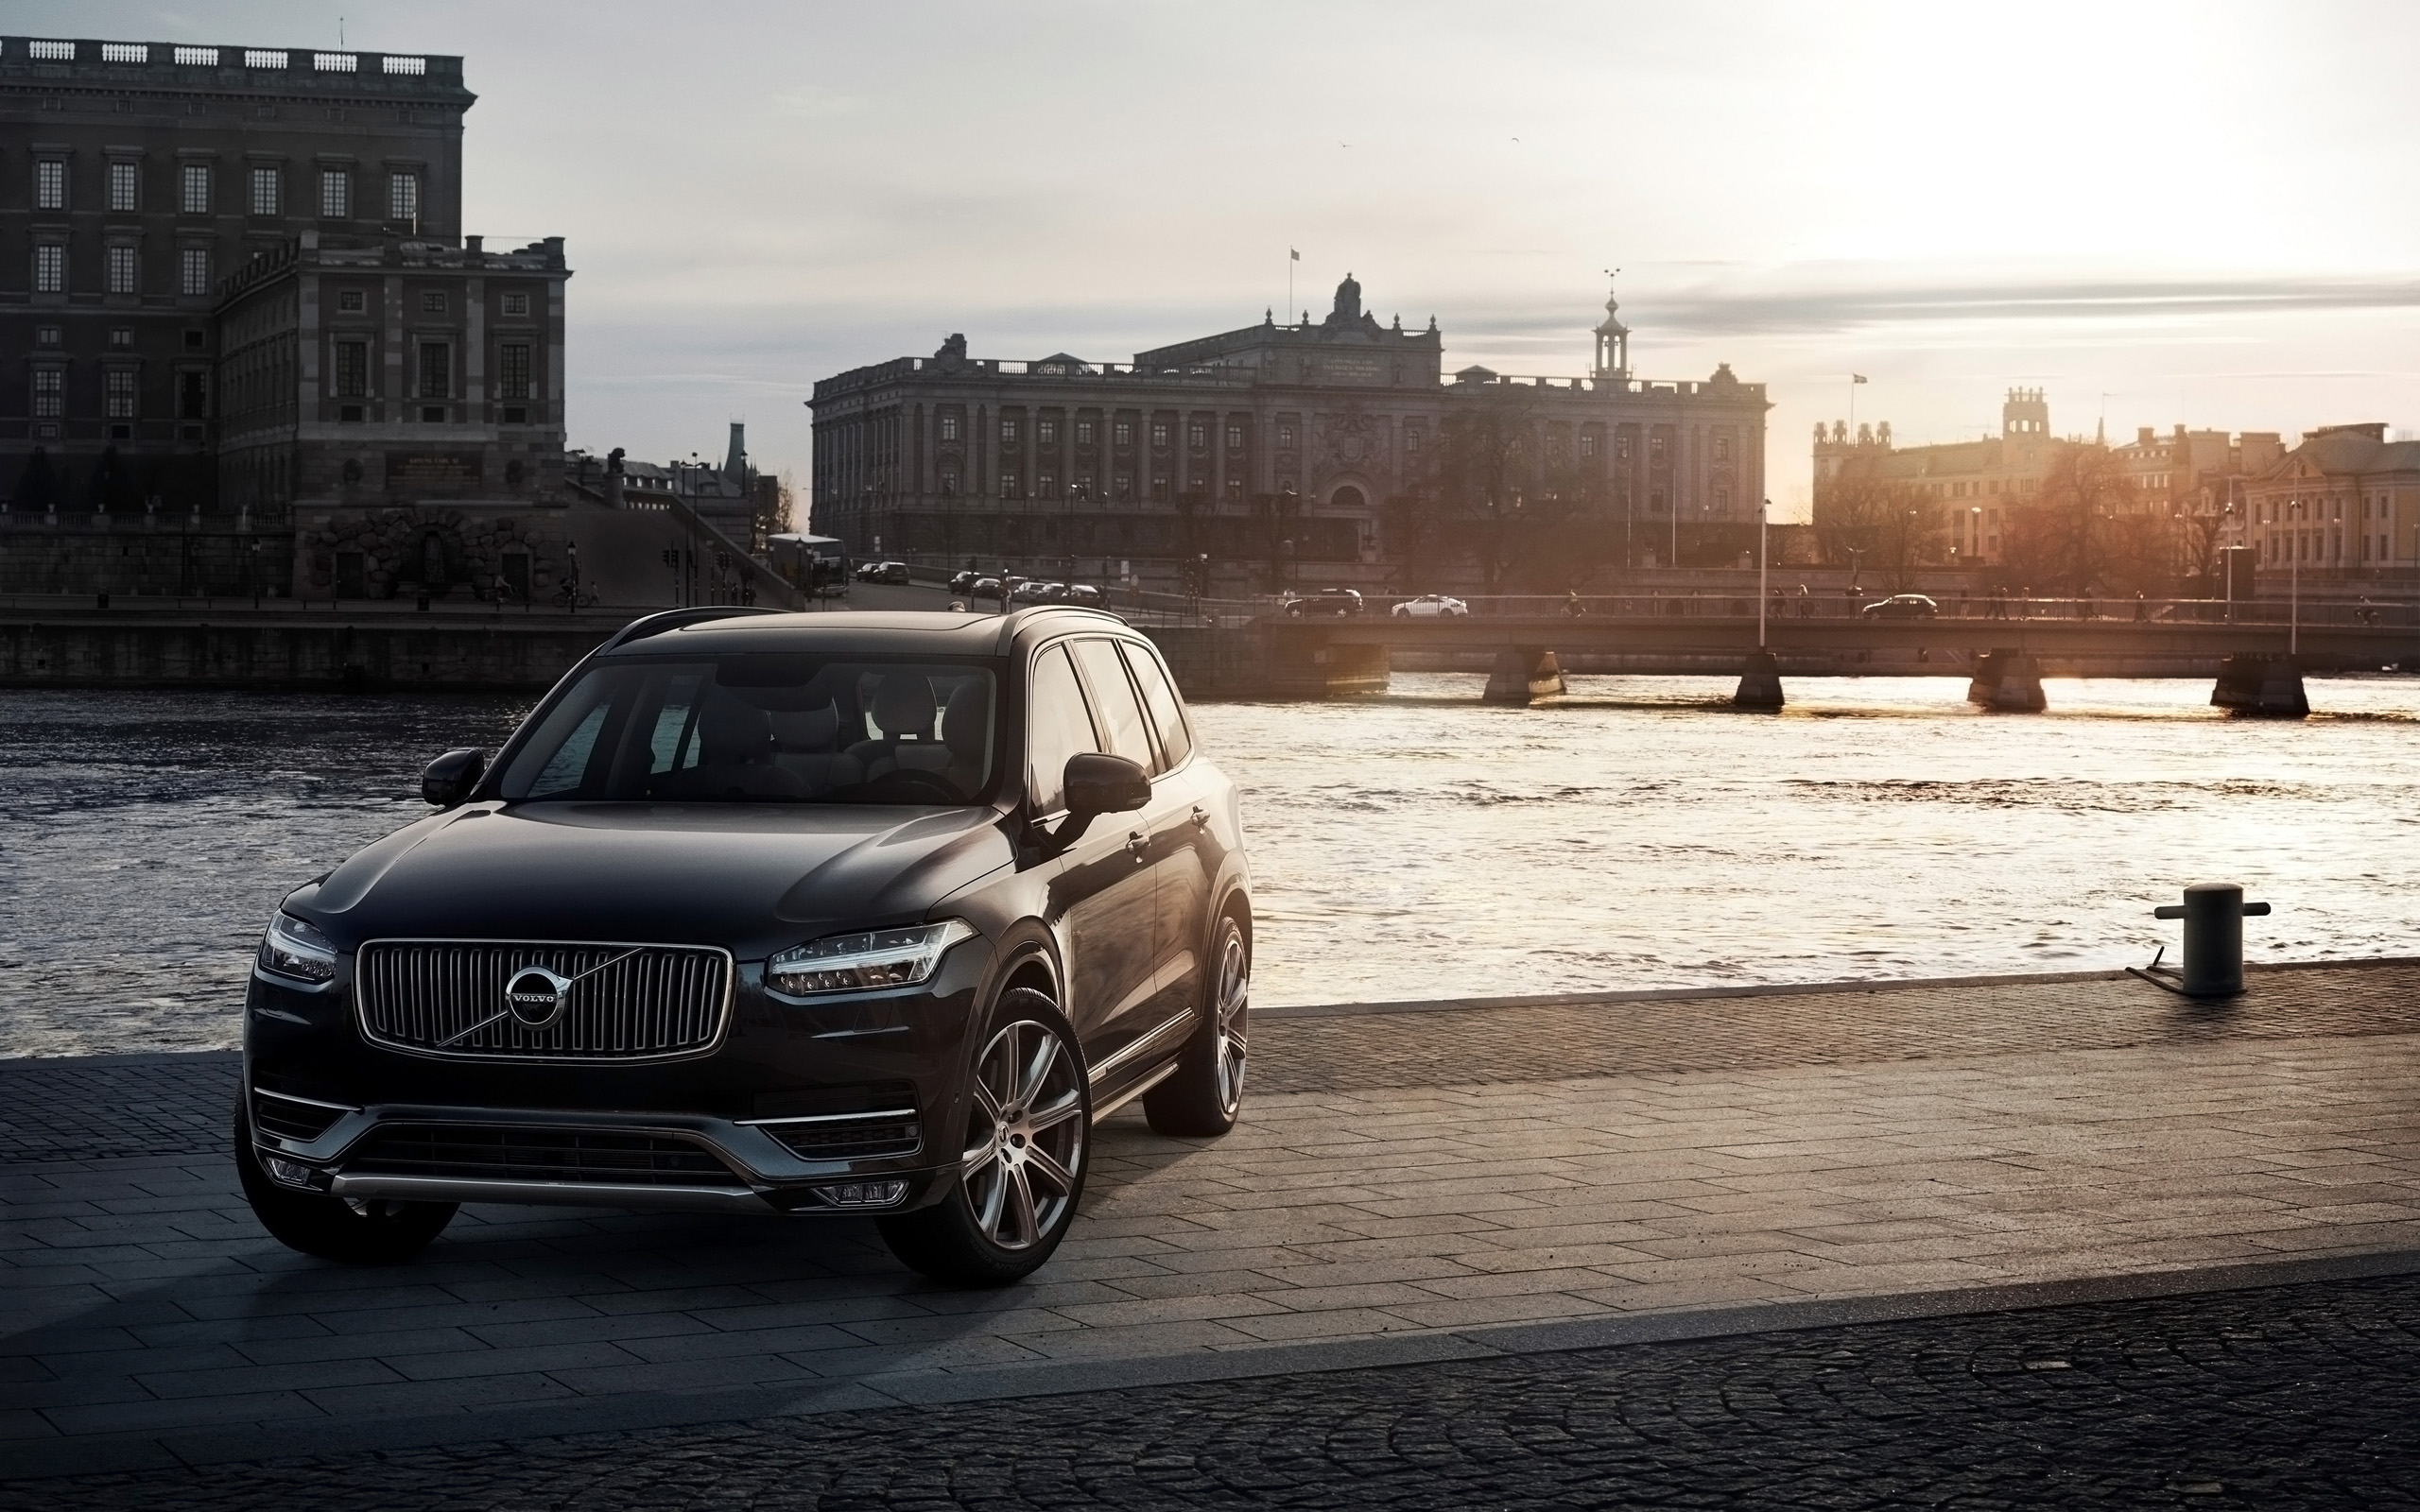 2015 Volvo XC90 First Edition Wallpaper | HD Car Wallpapers | ID #4803